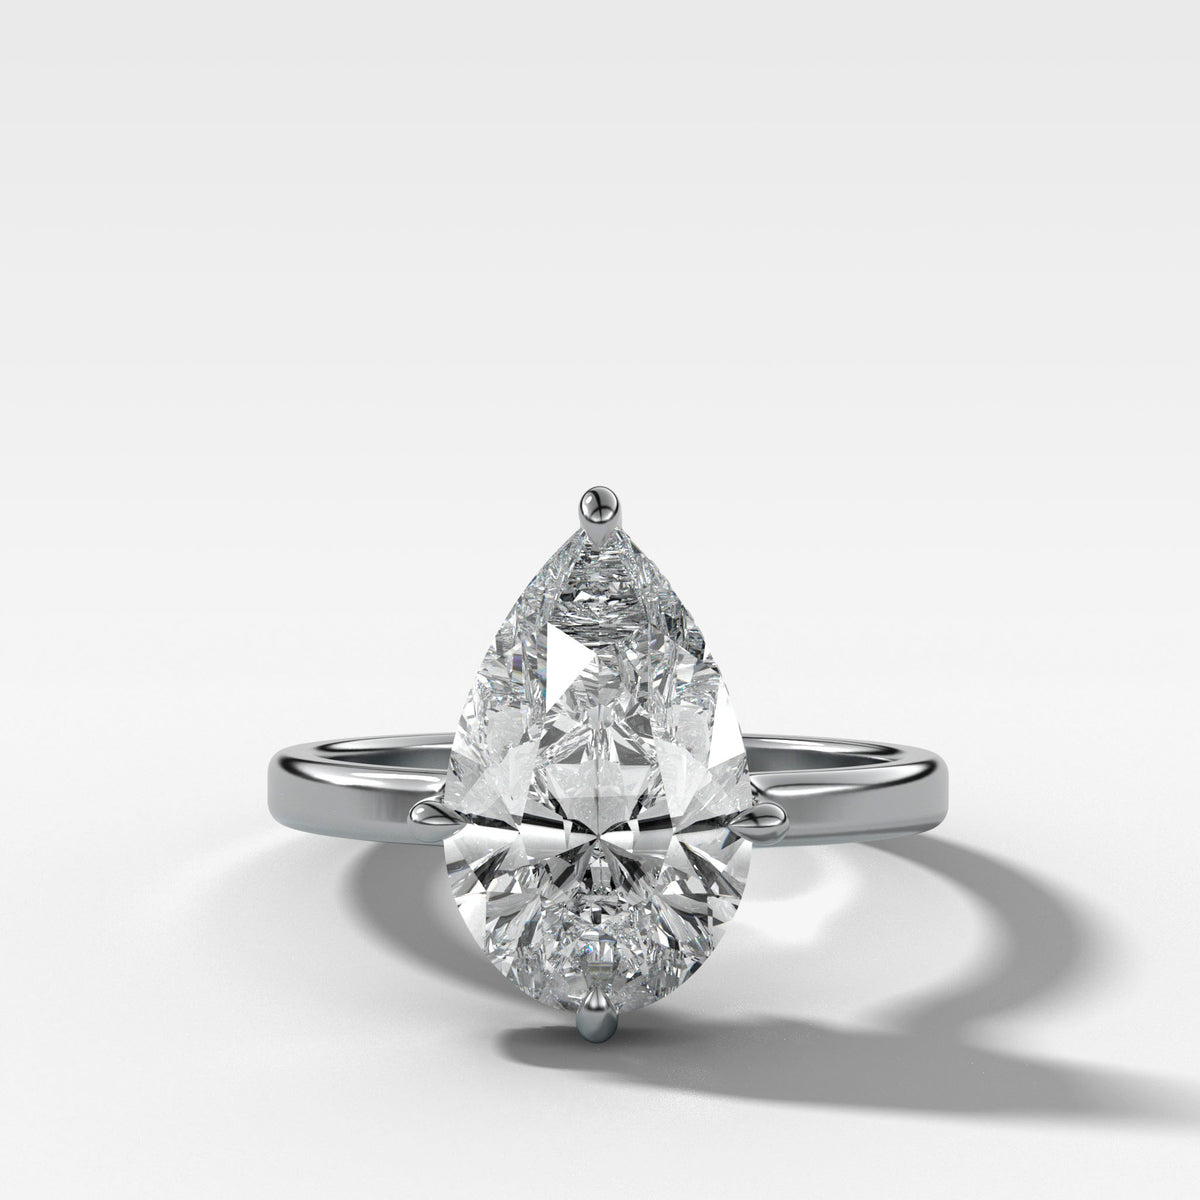 Compass Solitaire Engagement Ring with Pear Cut Diamond